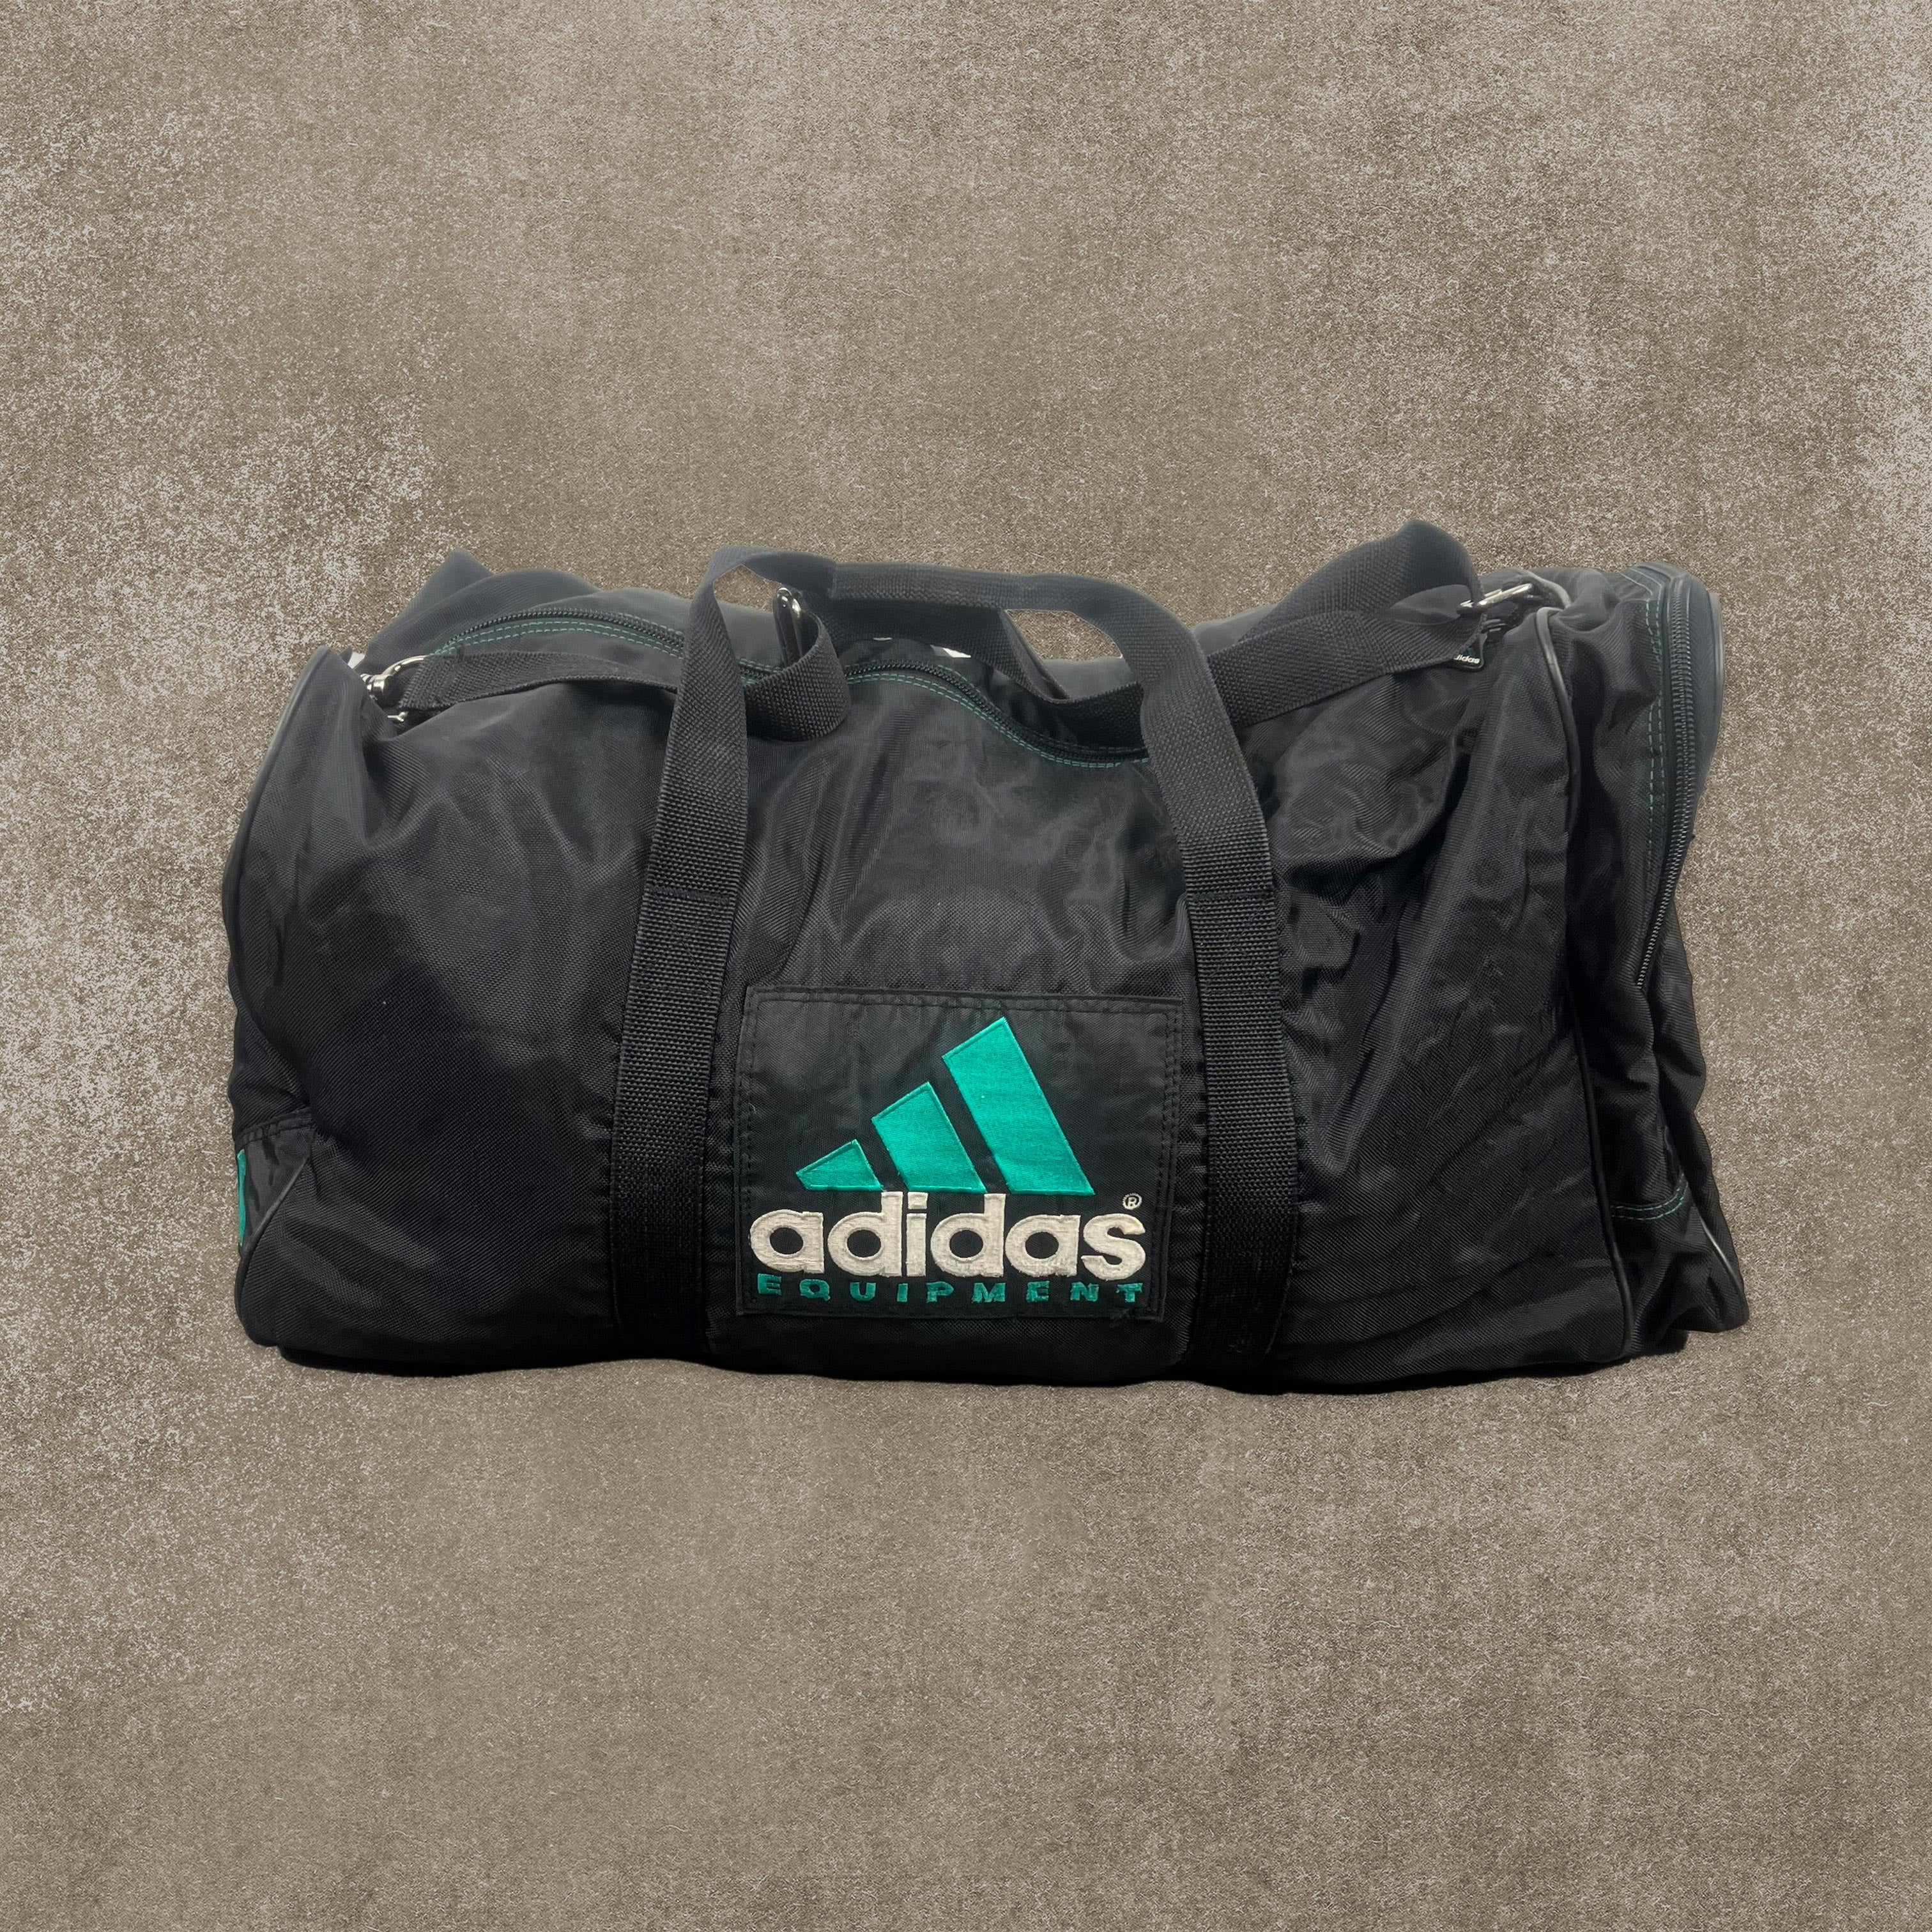 Adidas Equipment RARE Black Embroidered Spell Out Holdall Duffle Bag